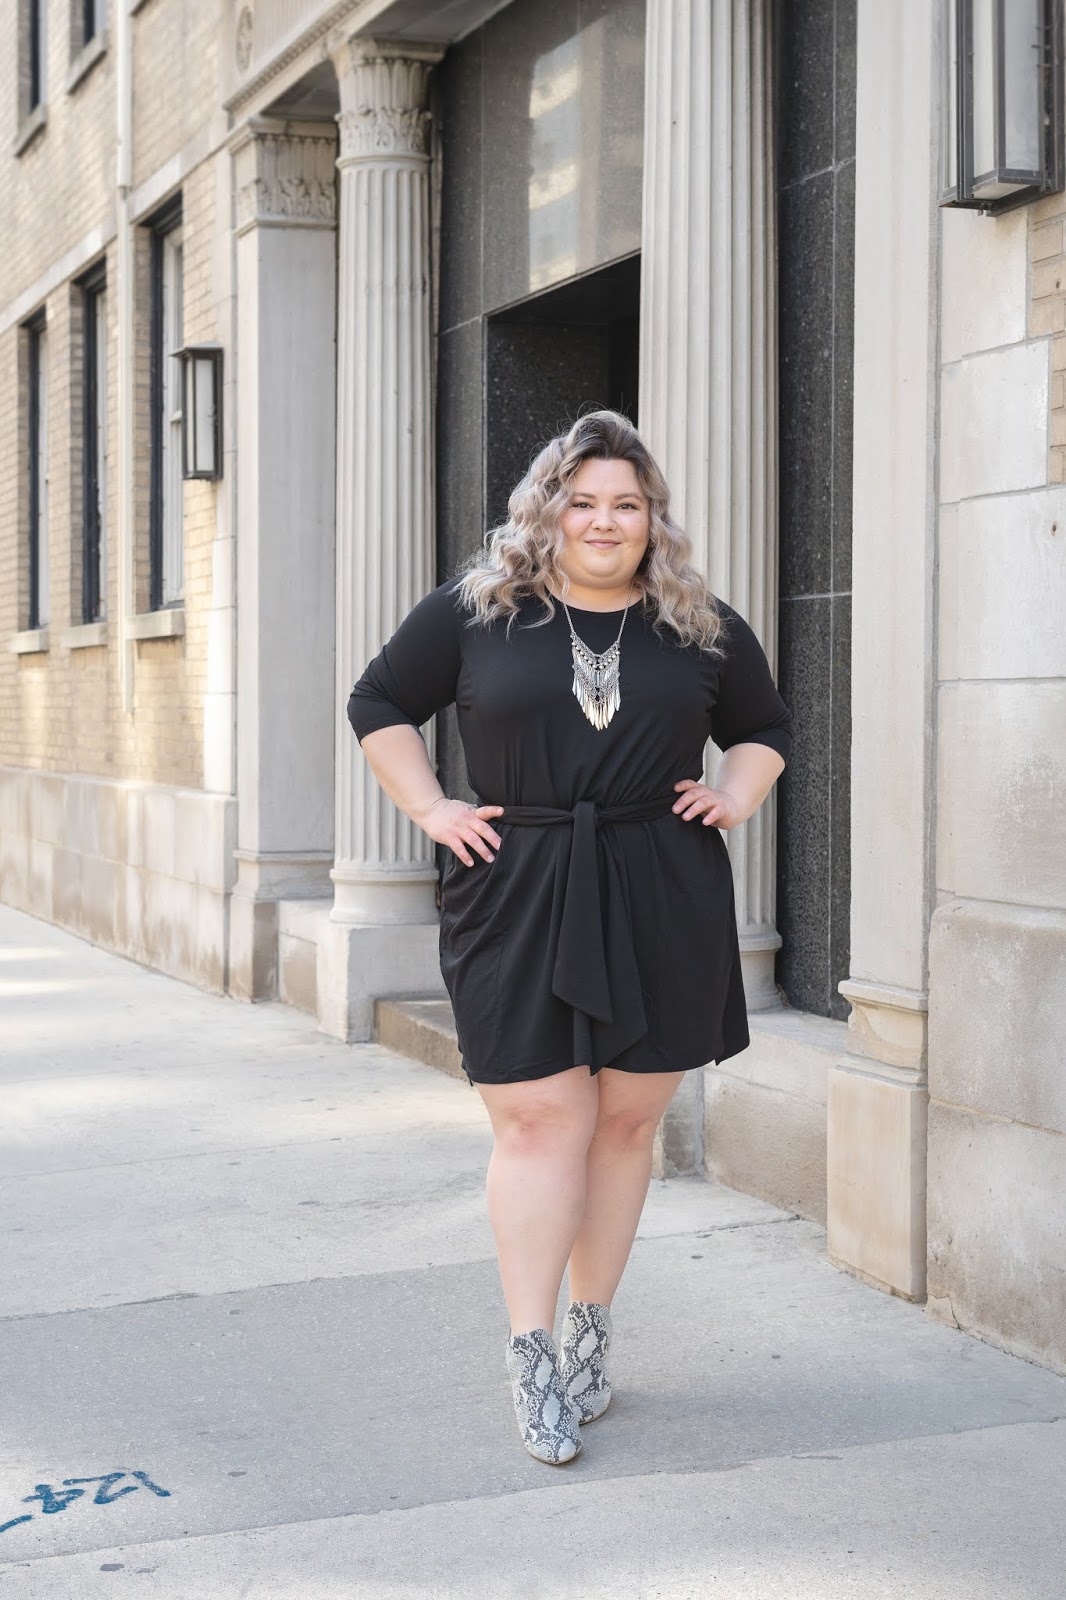 Chicago Plus Size Petite Fashion Blogger, YouTuber, and model Natalie Craig, of Natalie in the City, review's Ori's Signature French Terry Dress.